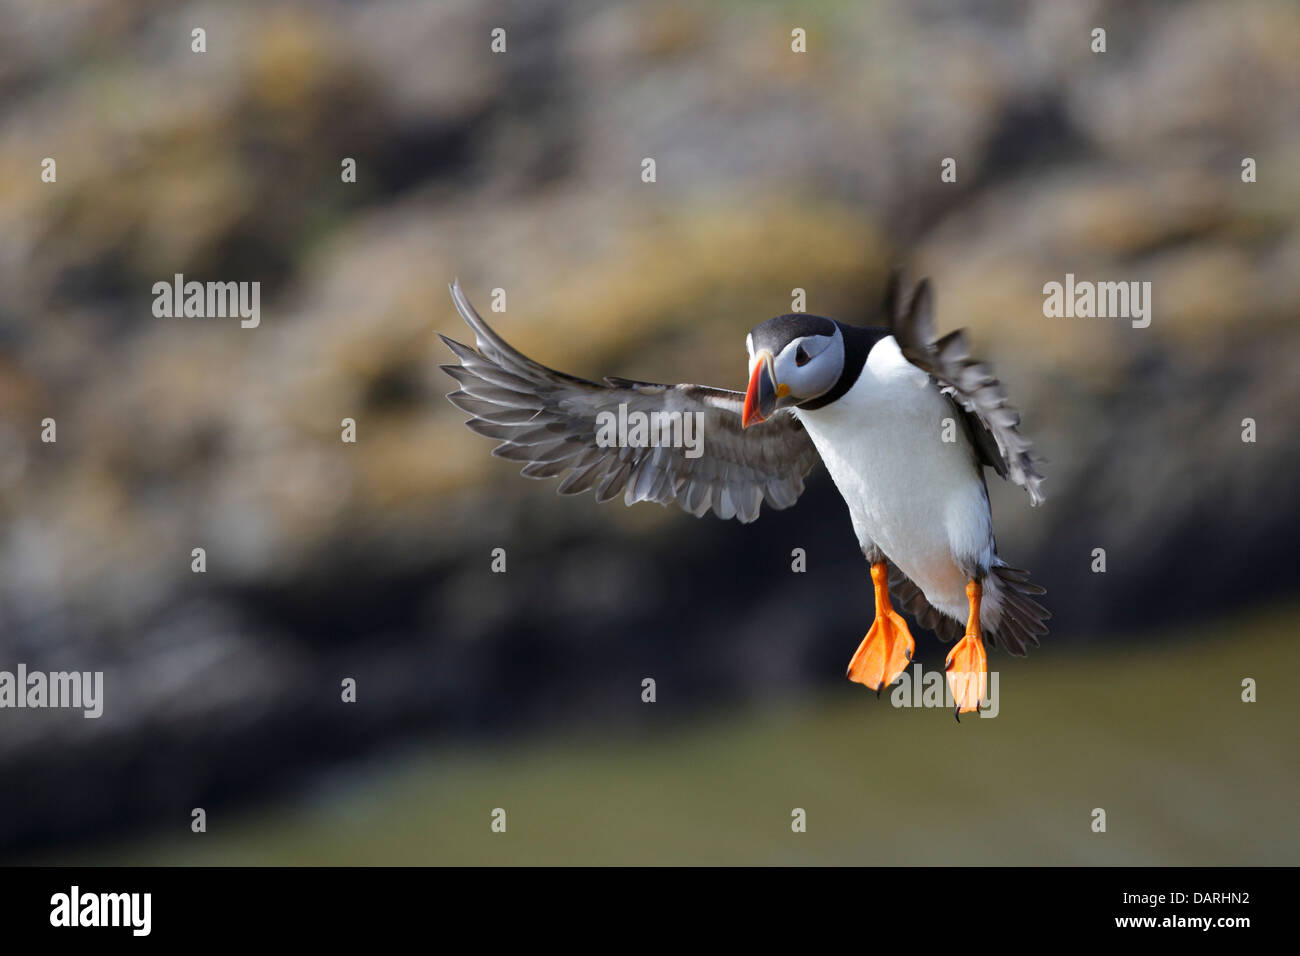 Puffin flying Stock Photo